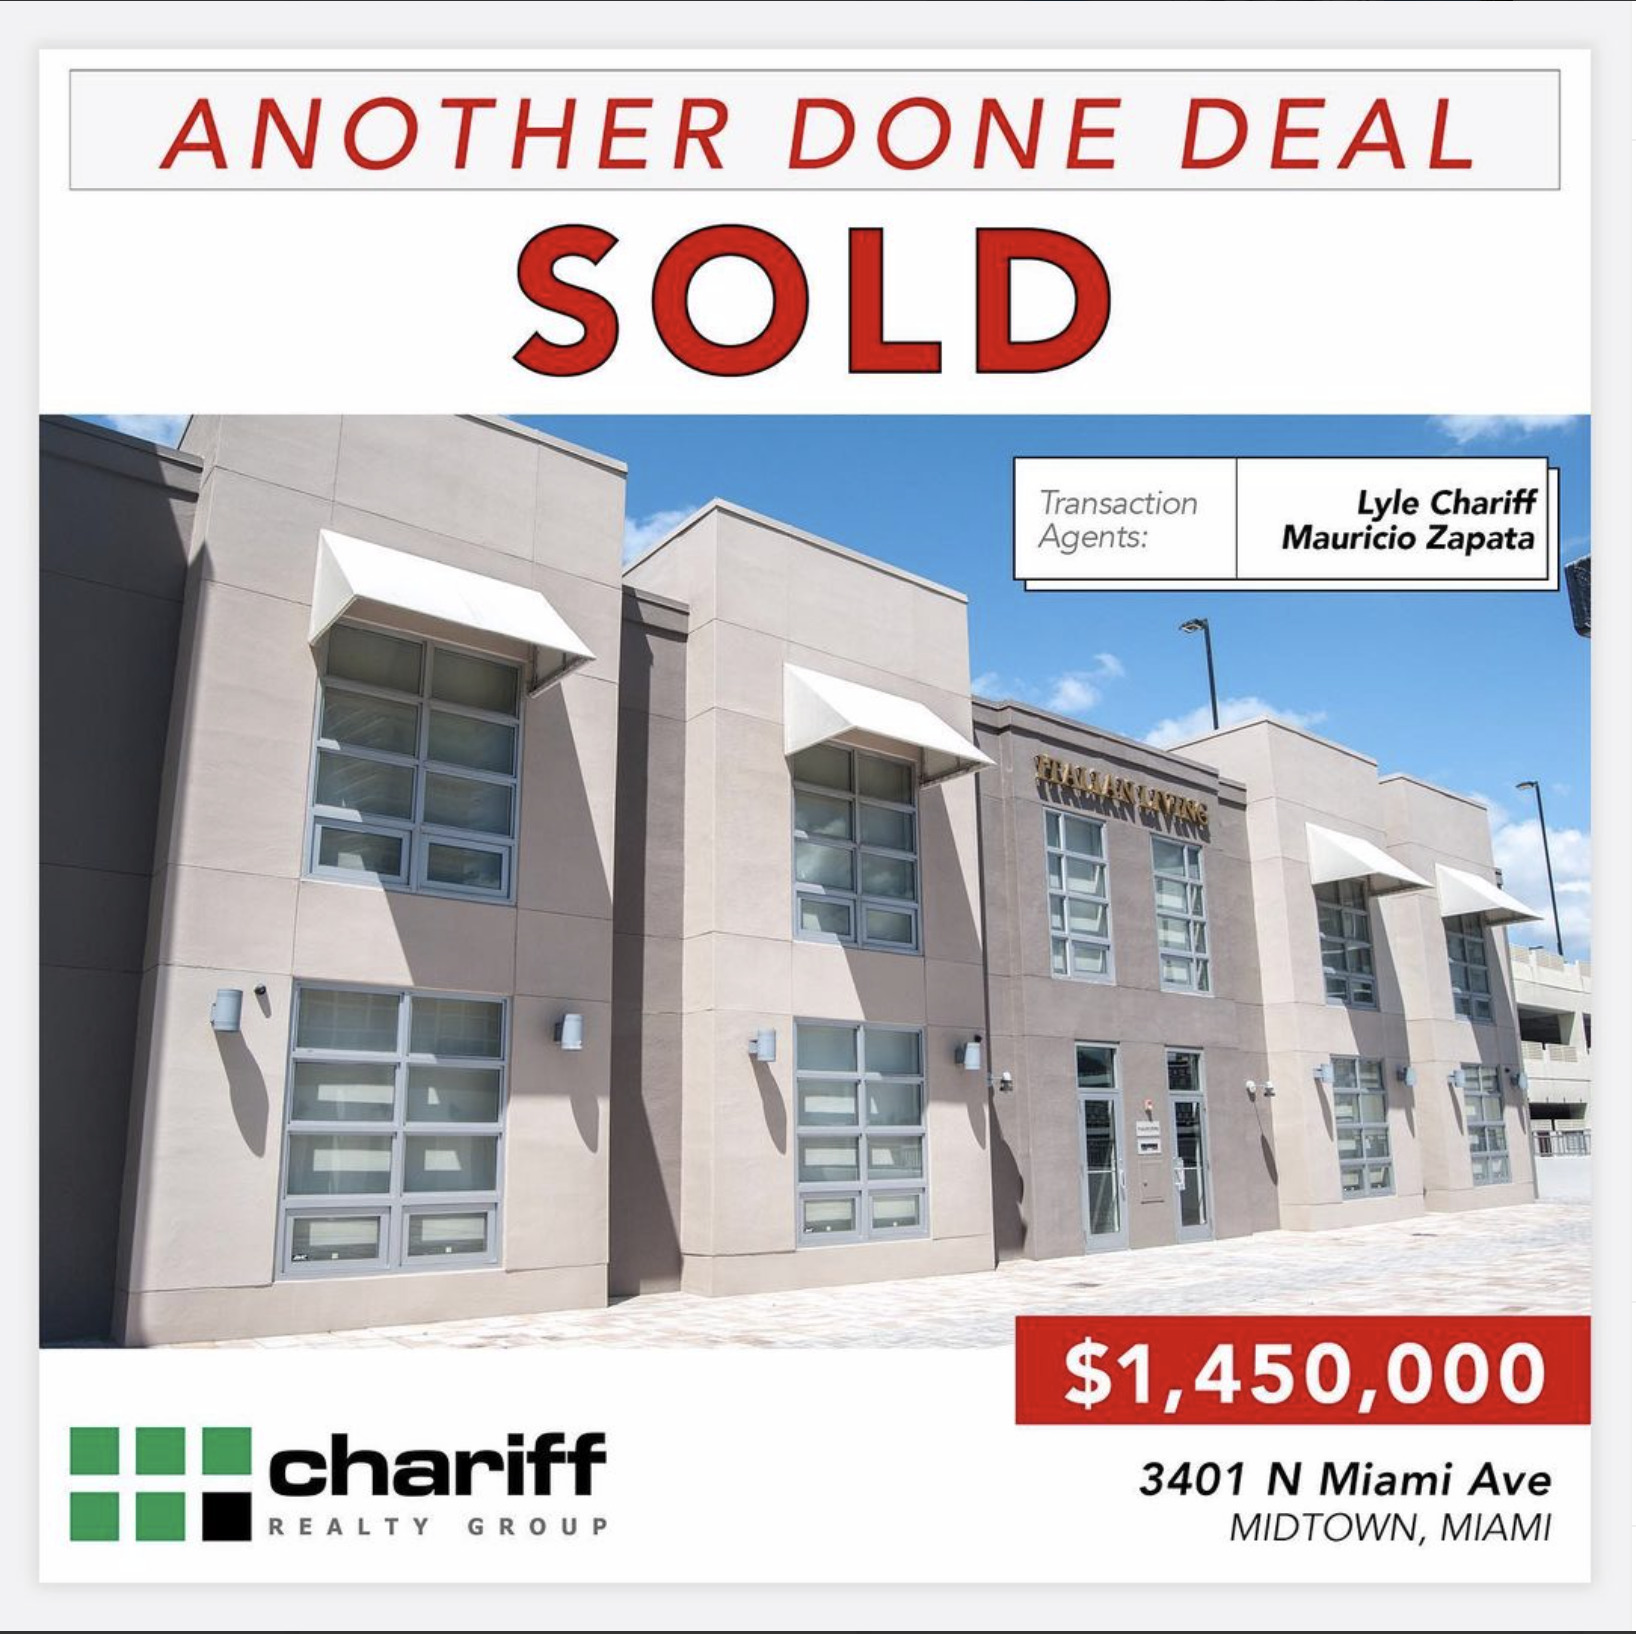 3401 North Miami Ave - Midtown Miami, Florida, Another Done Deal Sold - Chariff Realty Group